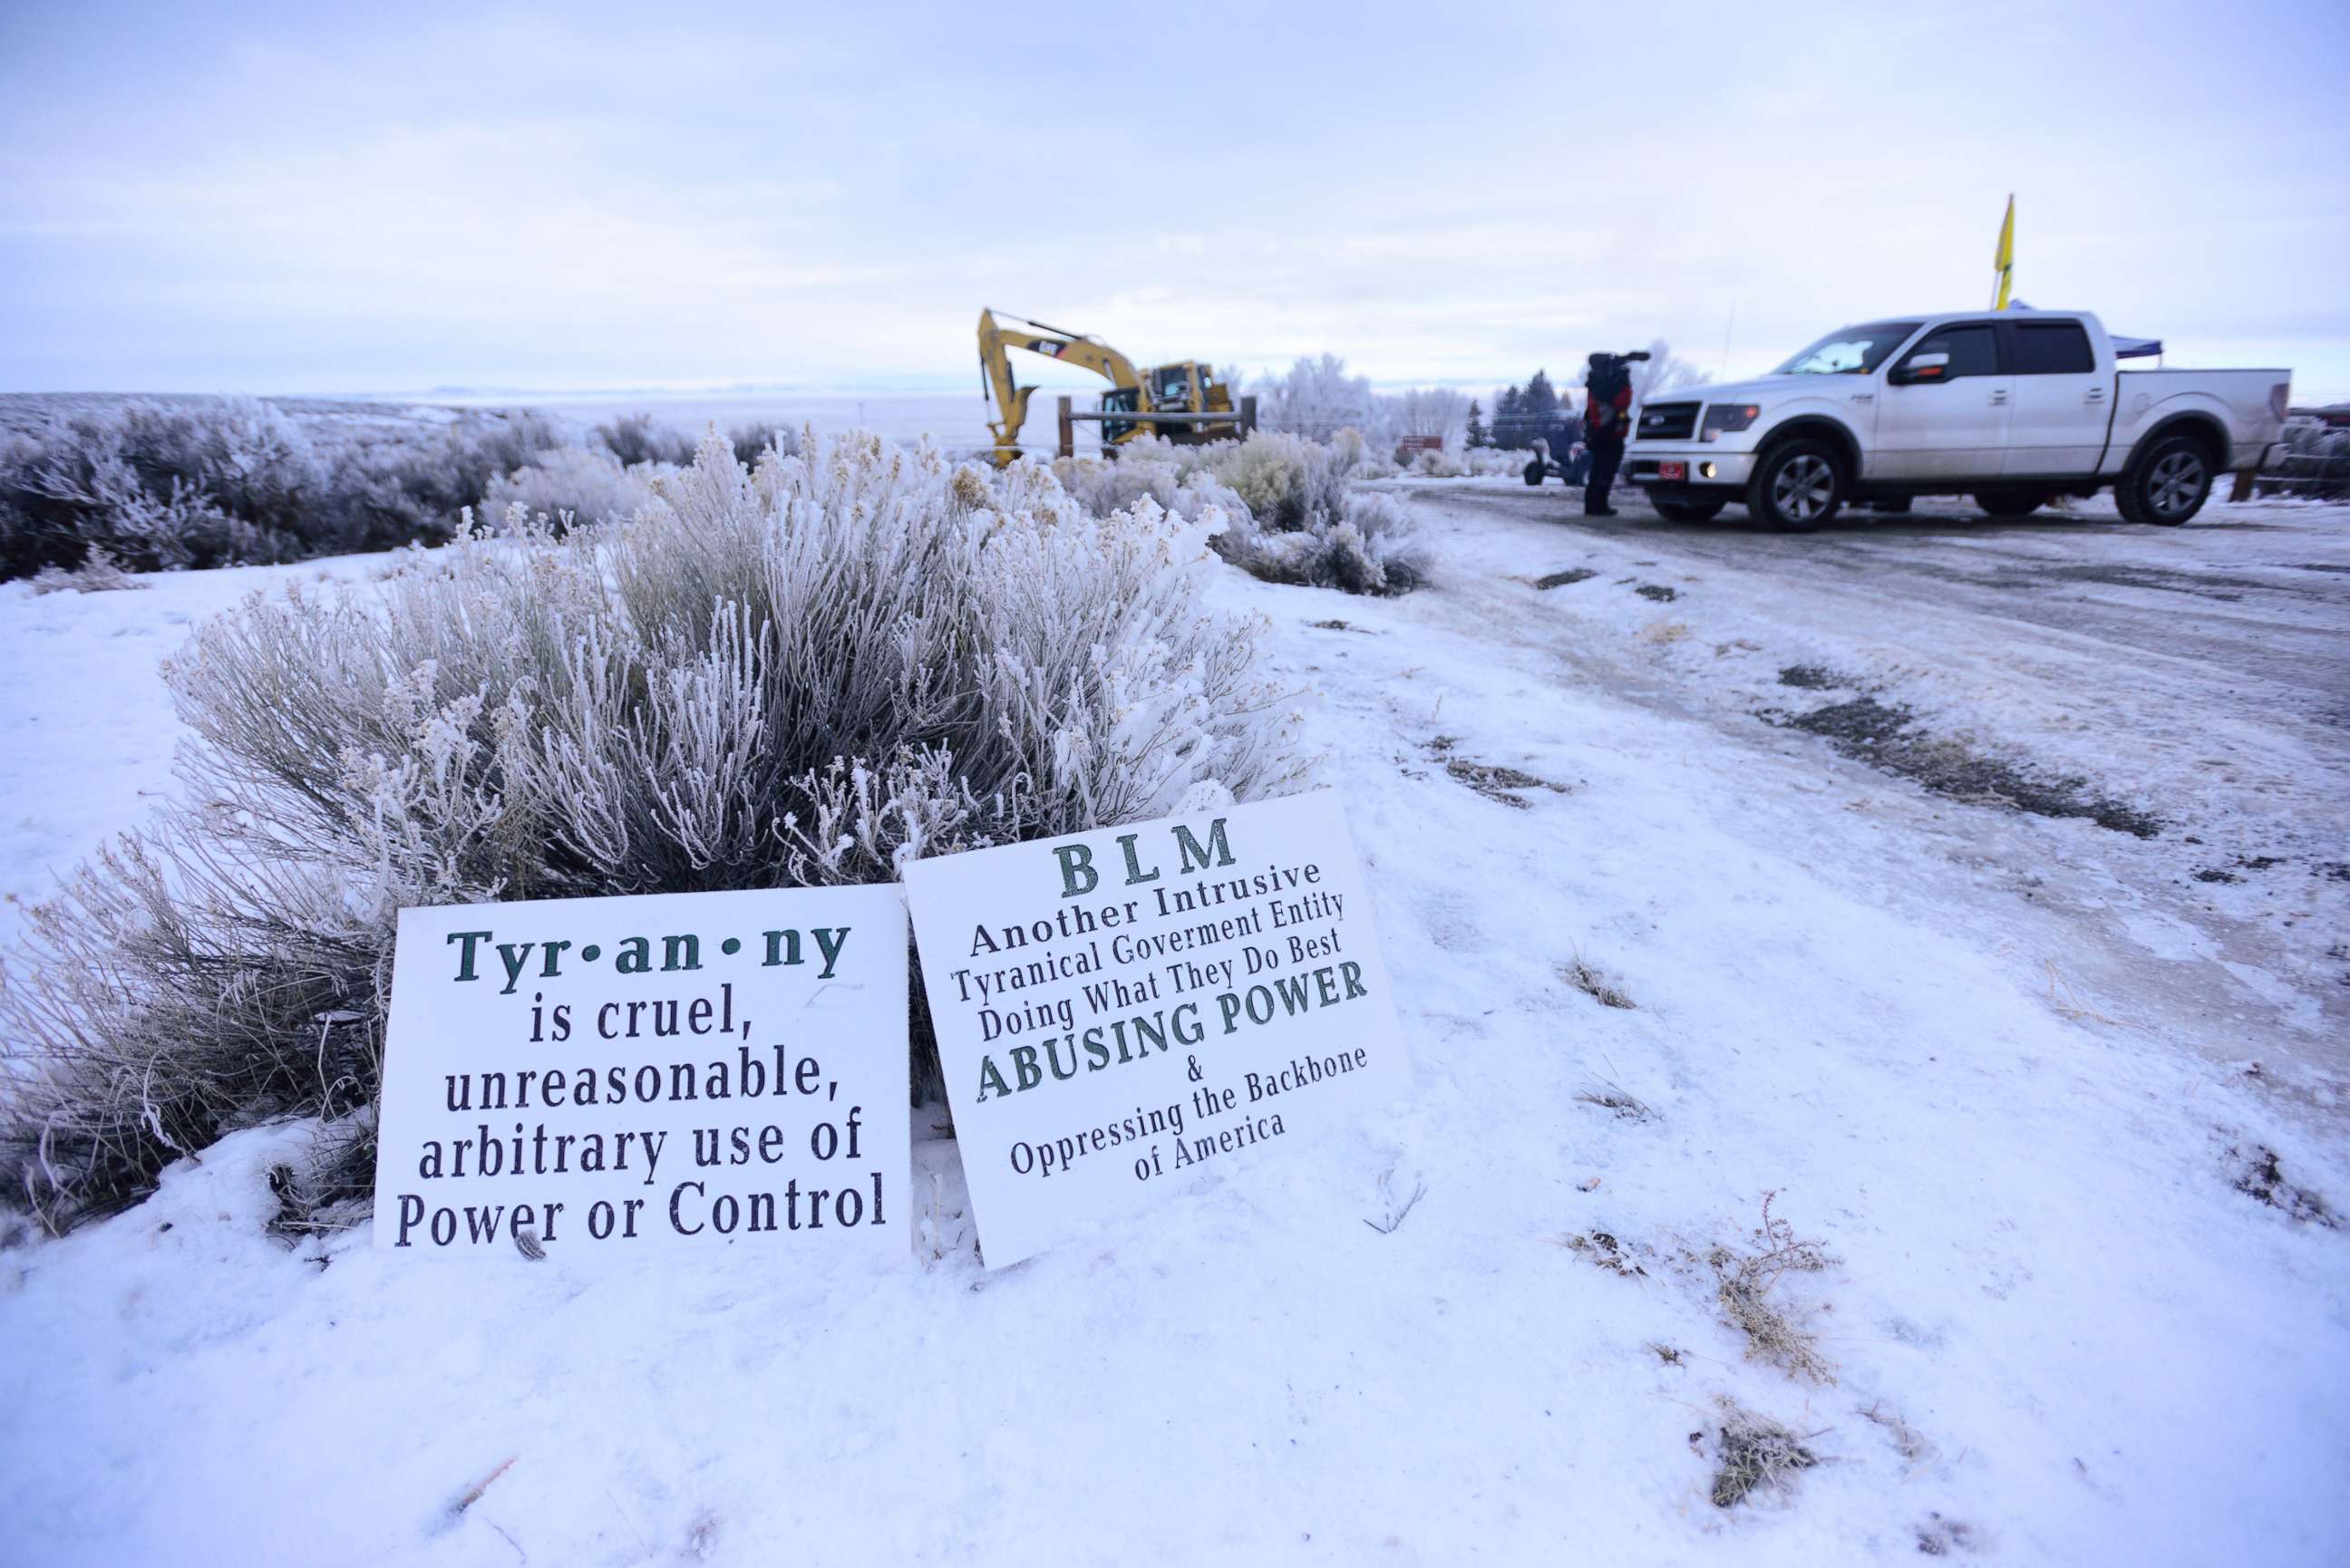 PHOTO: The entrance to the Malheur National Wildlife Refuge headquarters near Burns, Ore., pictured on January 9, 2016.